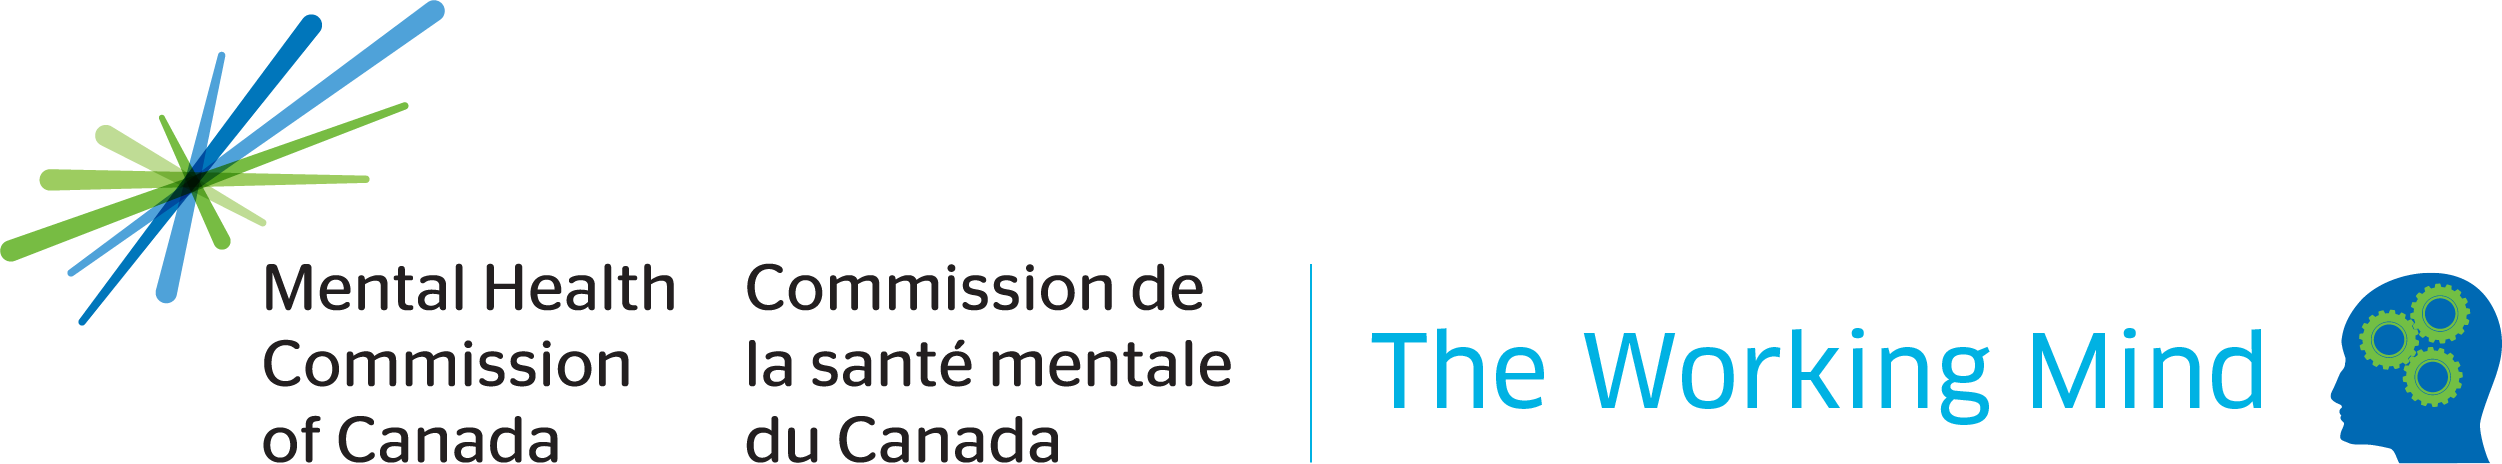 mental health commission of canada and working minds logos